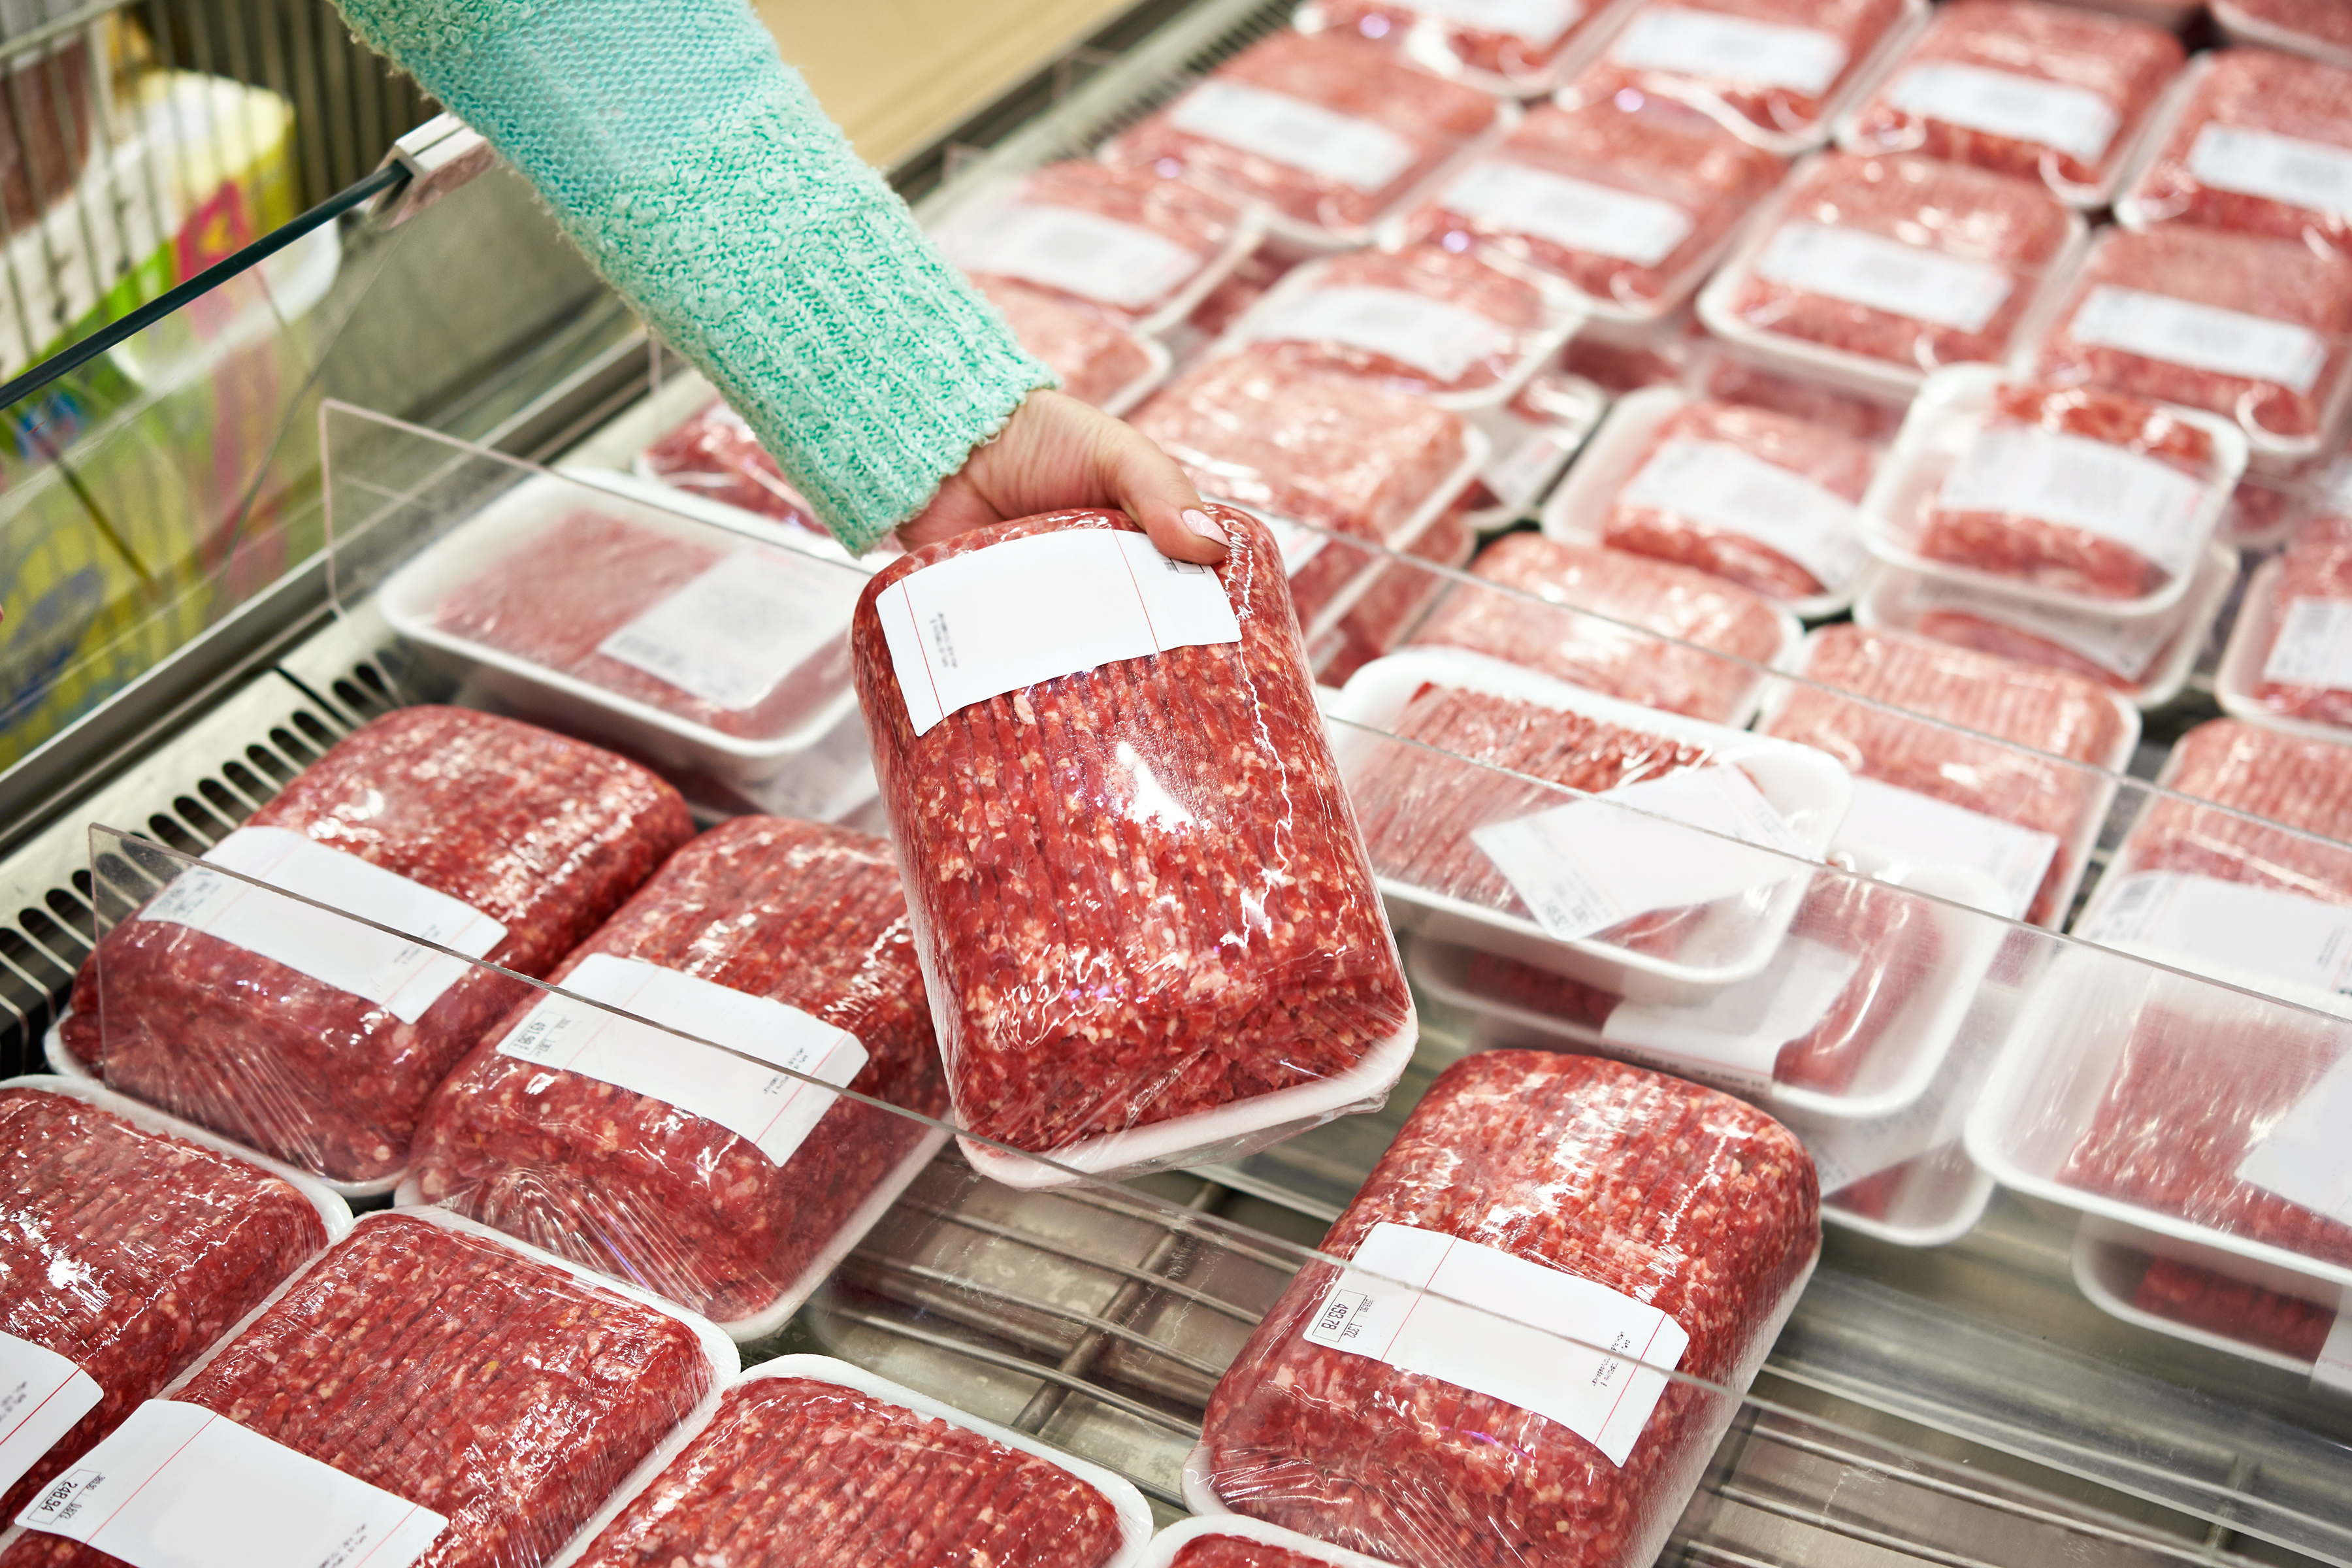 Beef recall as dire warning issued